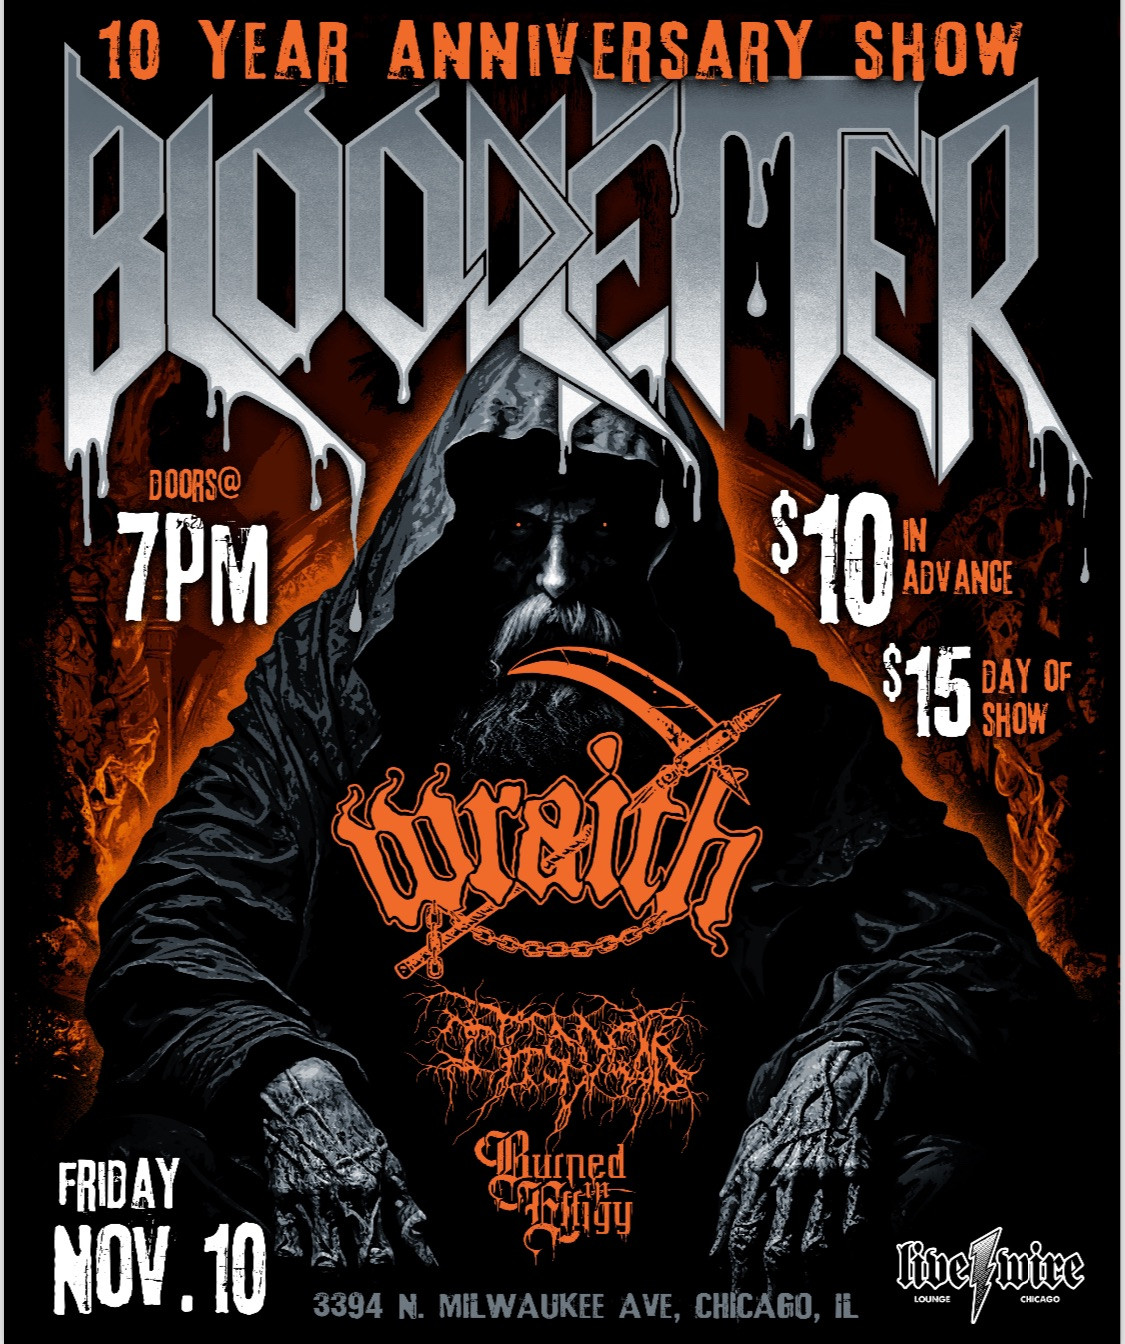 Bloodletter 10 year anniversary show with Wraith, It Is Dead & Burned In Effigy